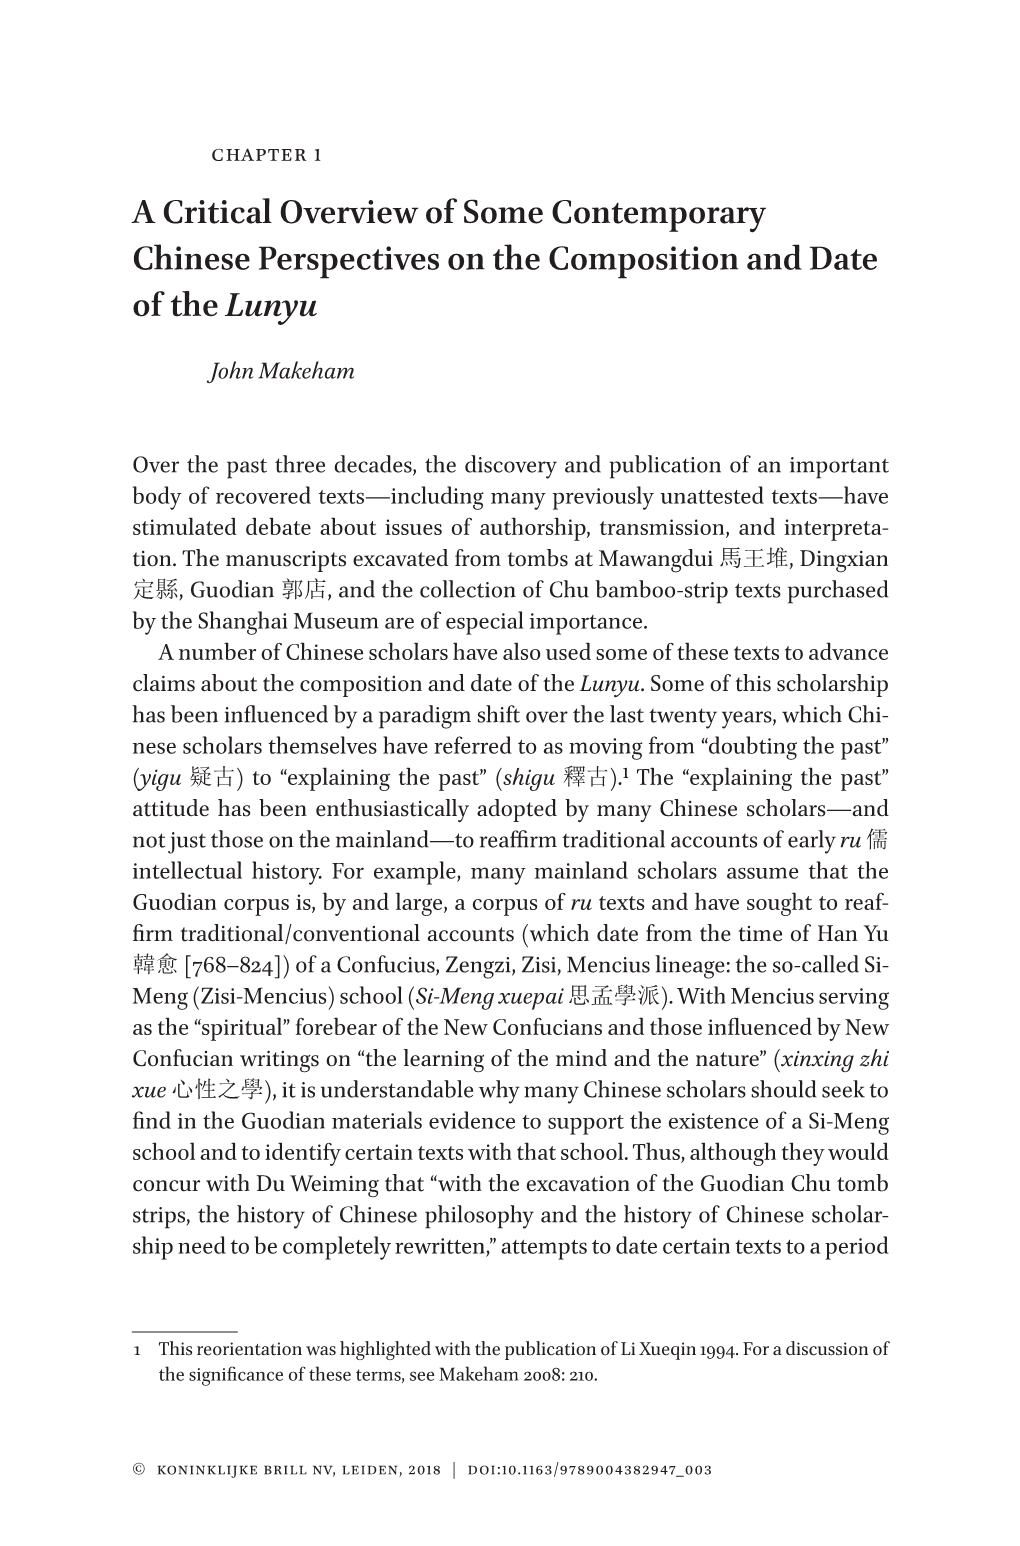 A Critical Overview of Some Contemporary Chinese Perspectives on the Composition and Date of the Lunyu